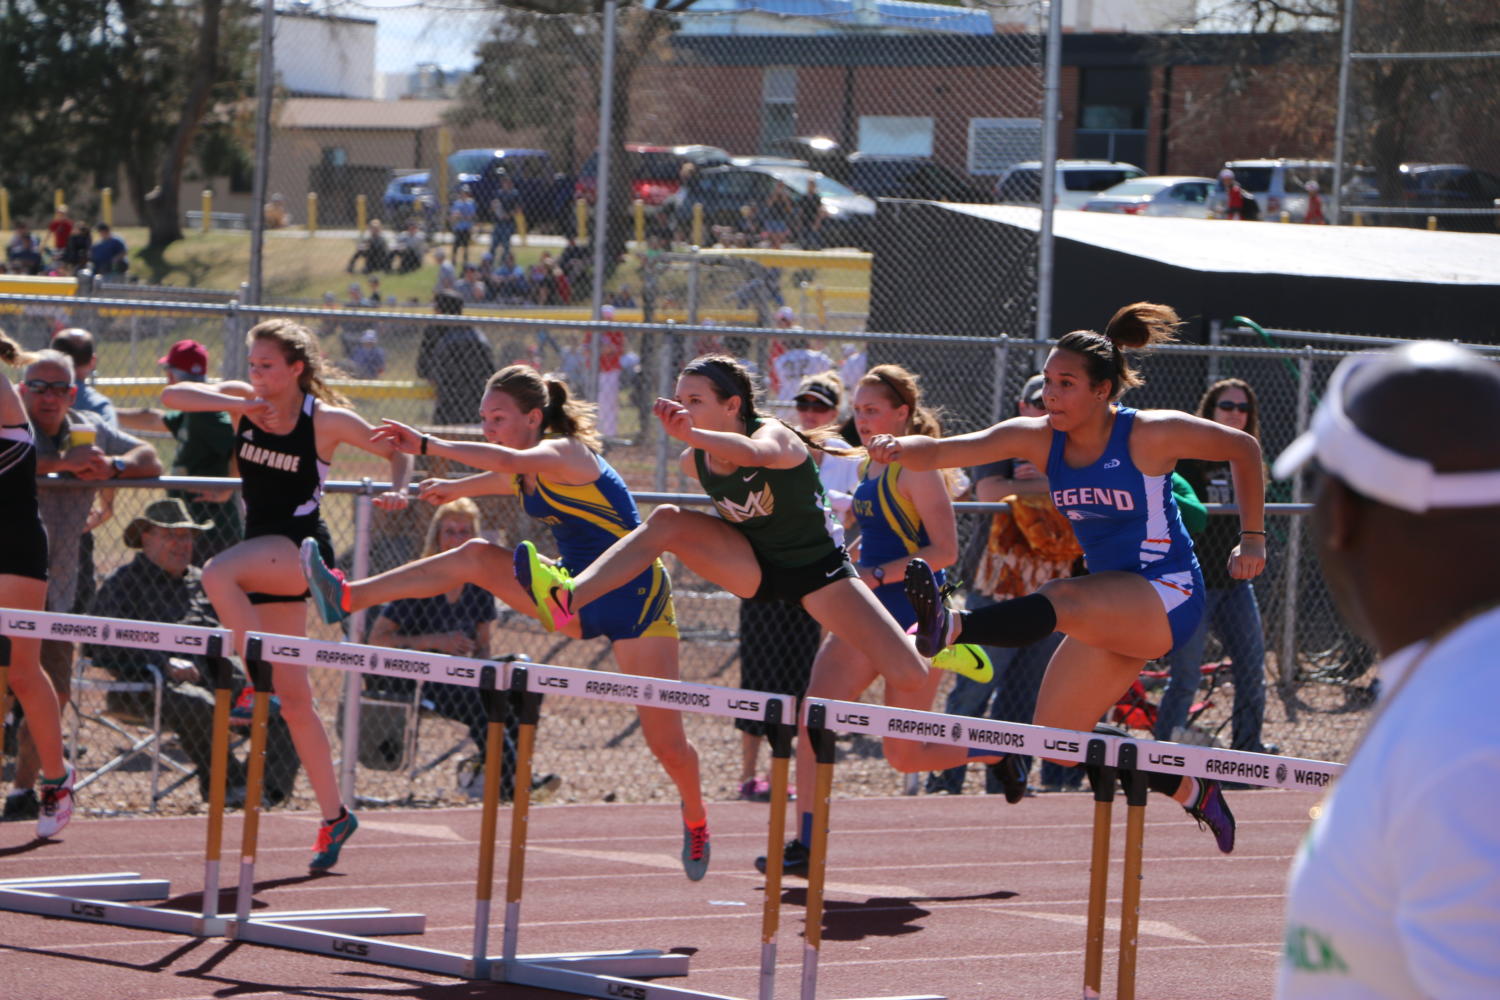 Lindsey Roberts running the 300 meter hurdles at a track meet. courtesy of Scott Chamberlin